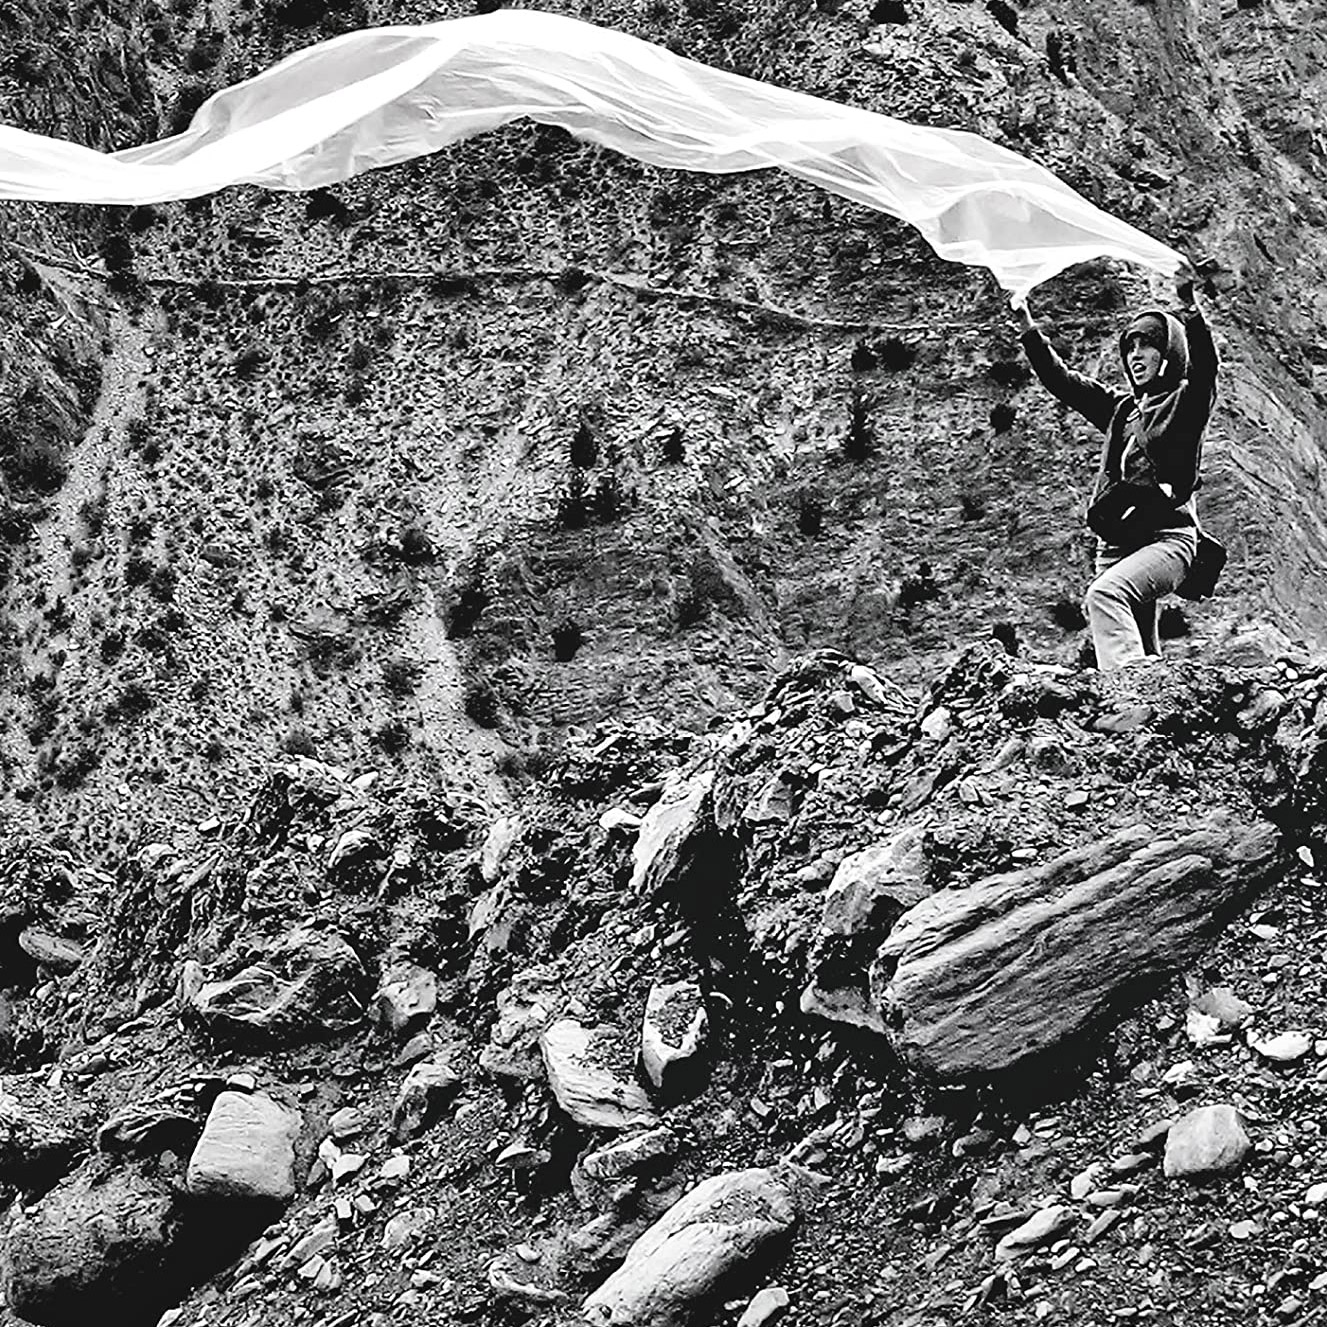 black and white image of a figure holding a long, white piece of fabric against a rocky background